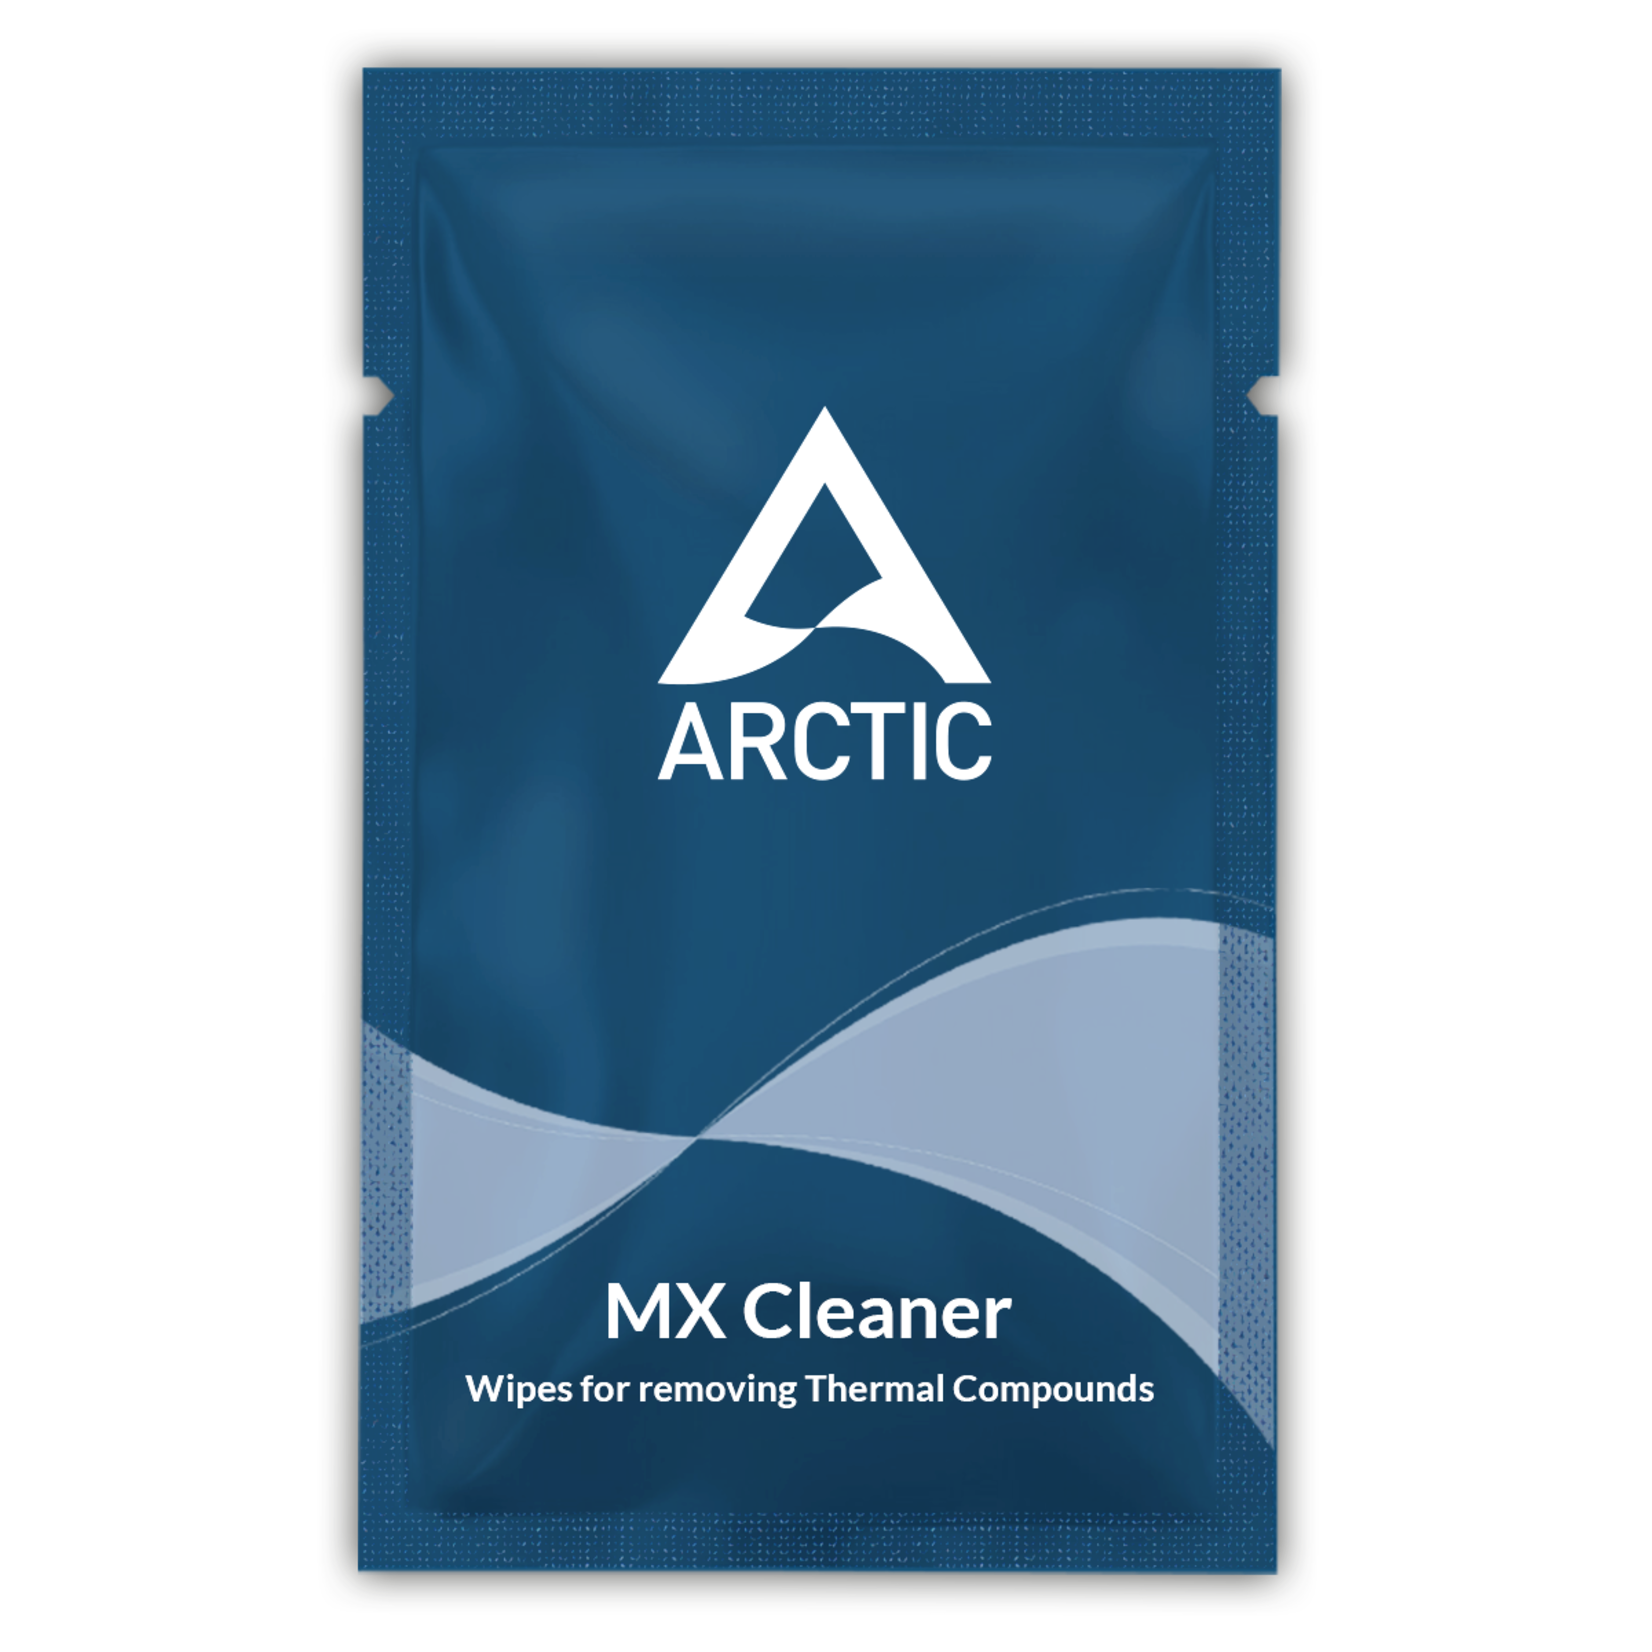 Arctic Arctic MX Cleaner Thermal Compound Wipes